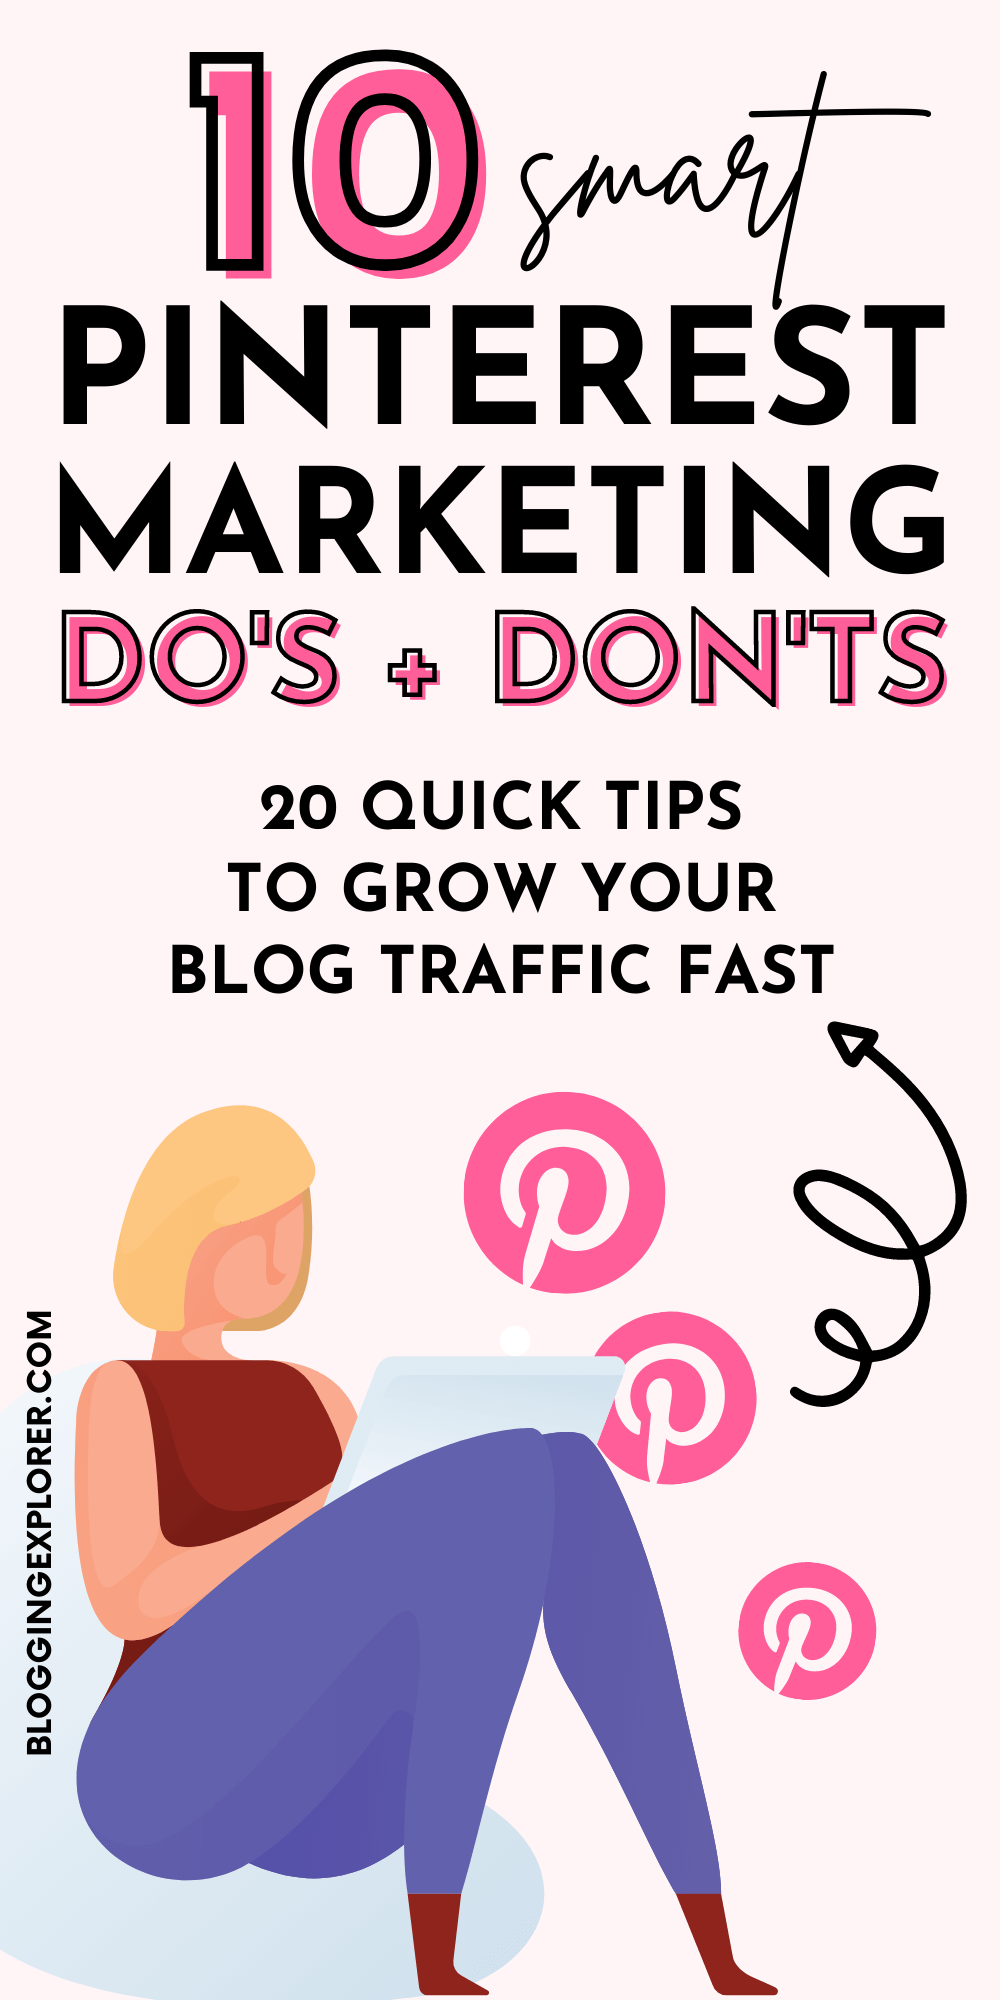 10 smart Pinterest marketing dos and donts for blog traffic